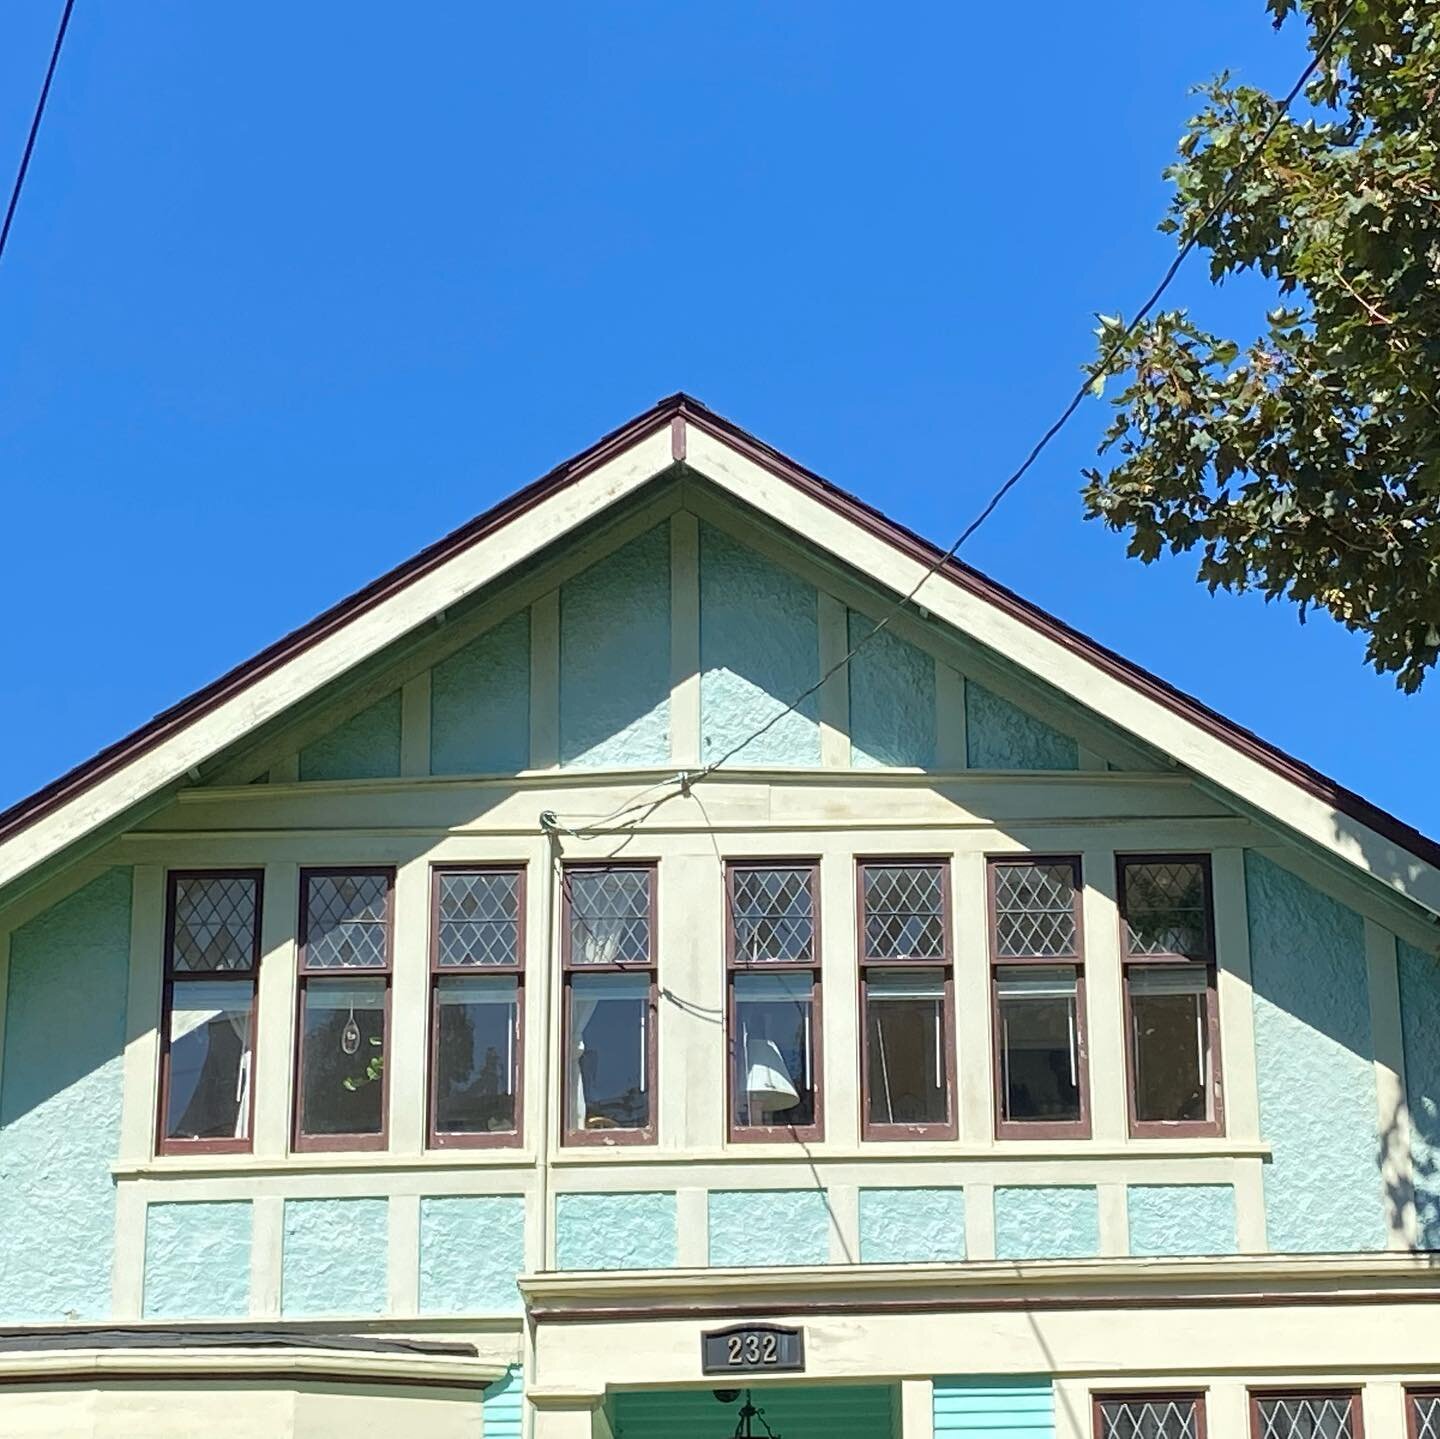 Double-hung diamond-paned leaded lights over single panes on a sweet icy blue 1912 Arts and Crafts house.